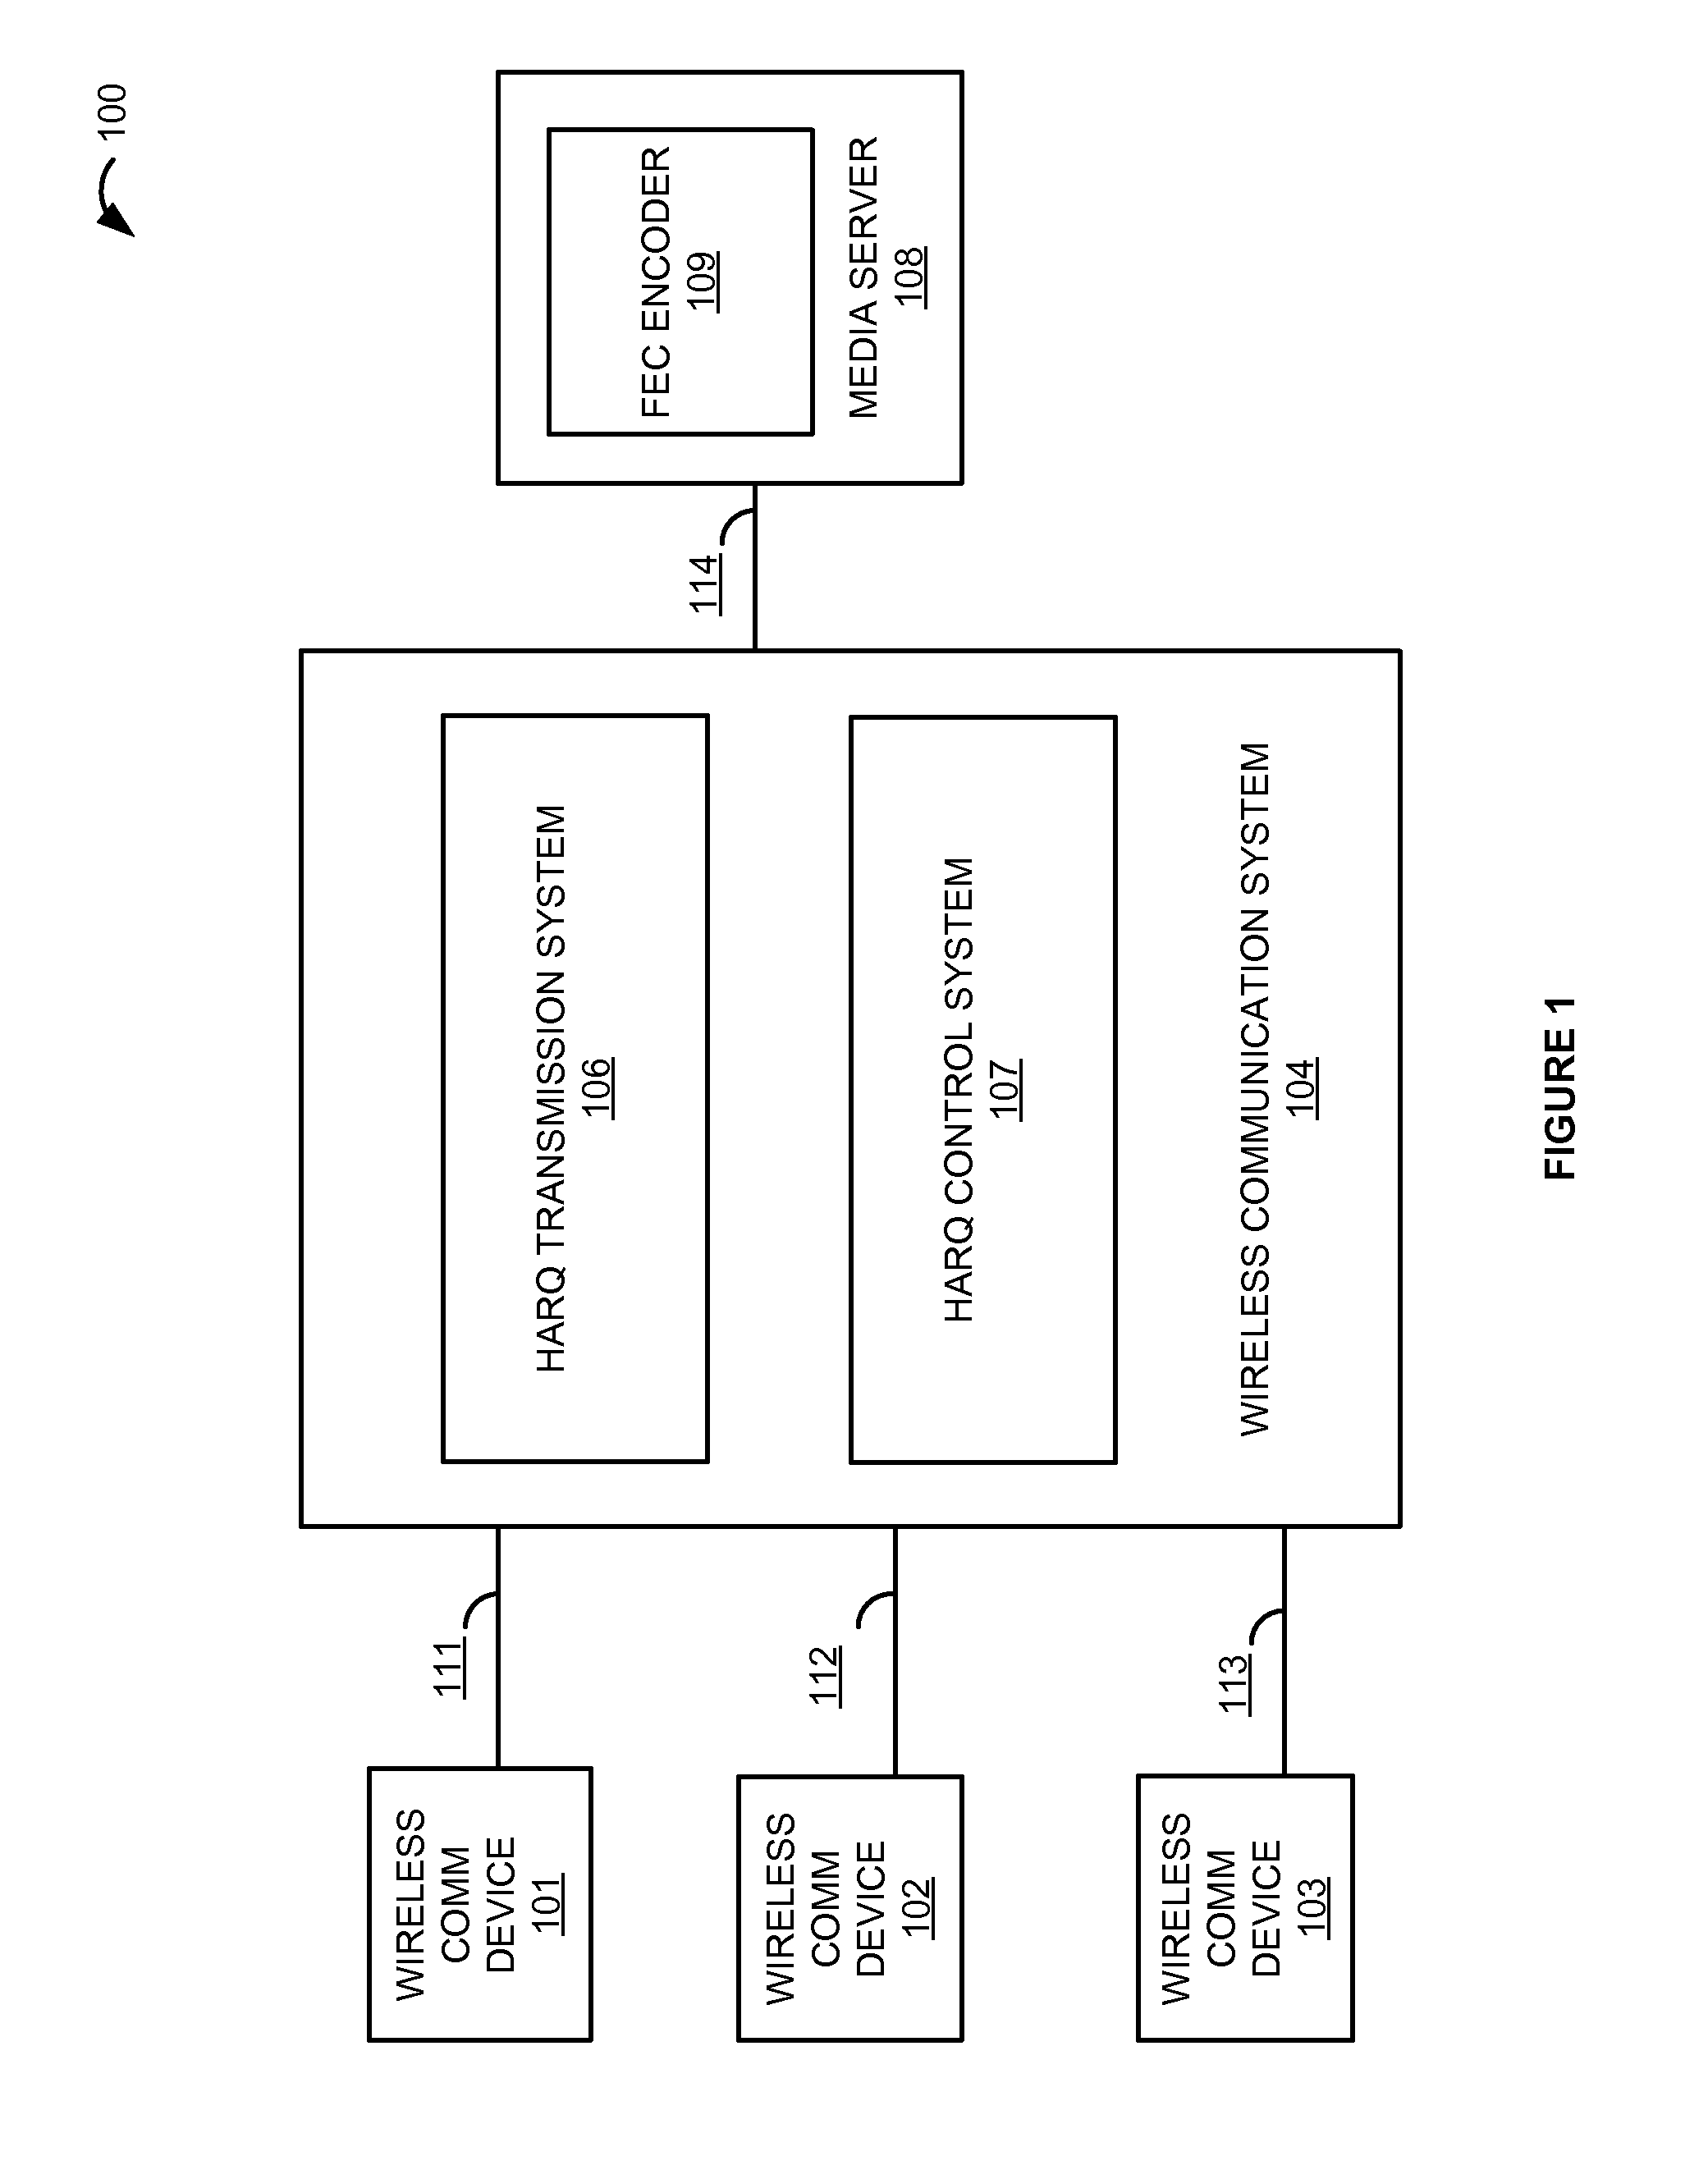 Forward error correction and retransmissions for media service optimization over a wireless communication network